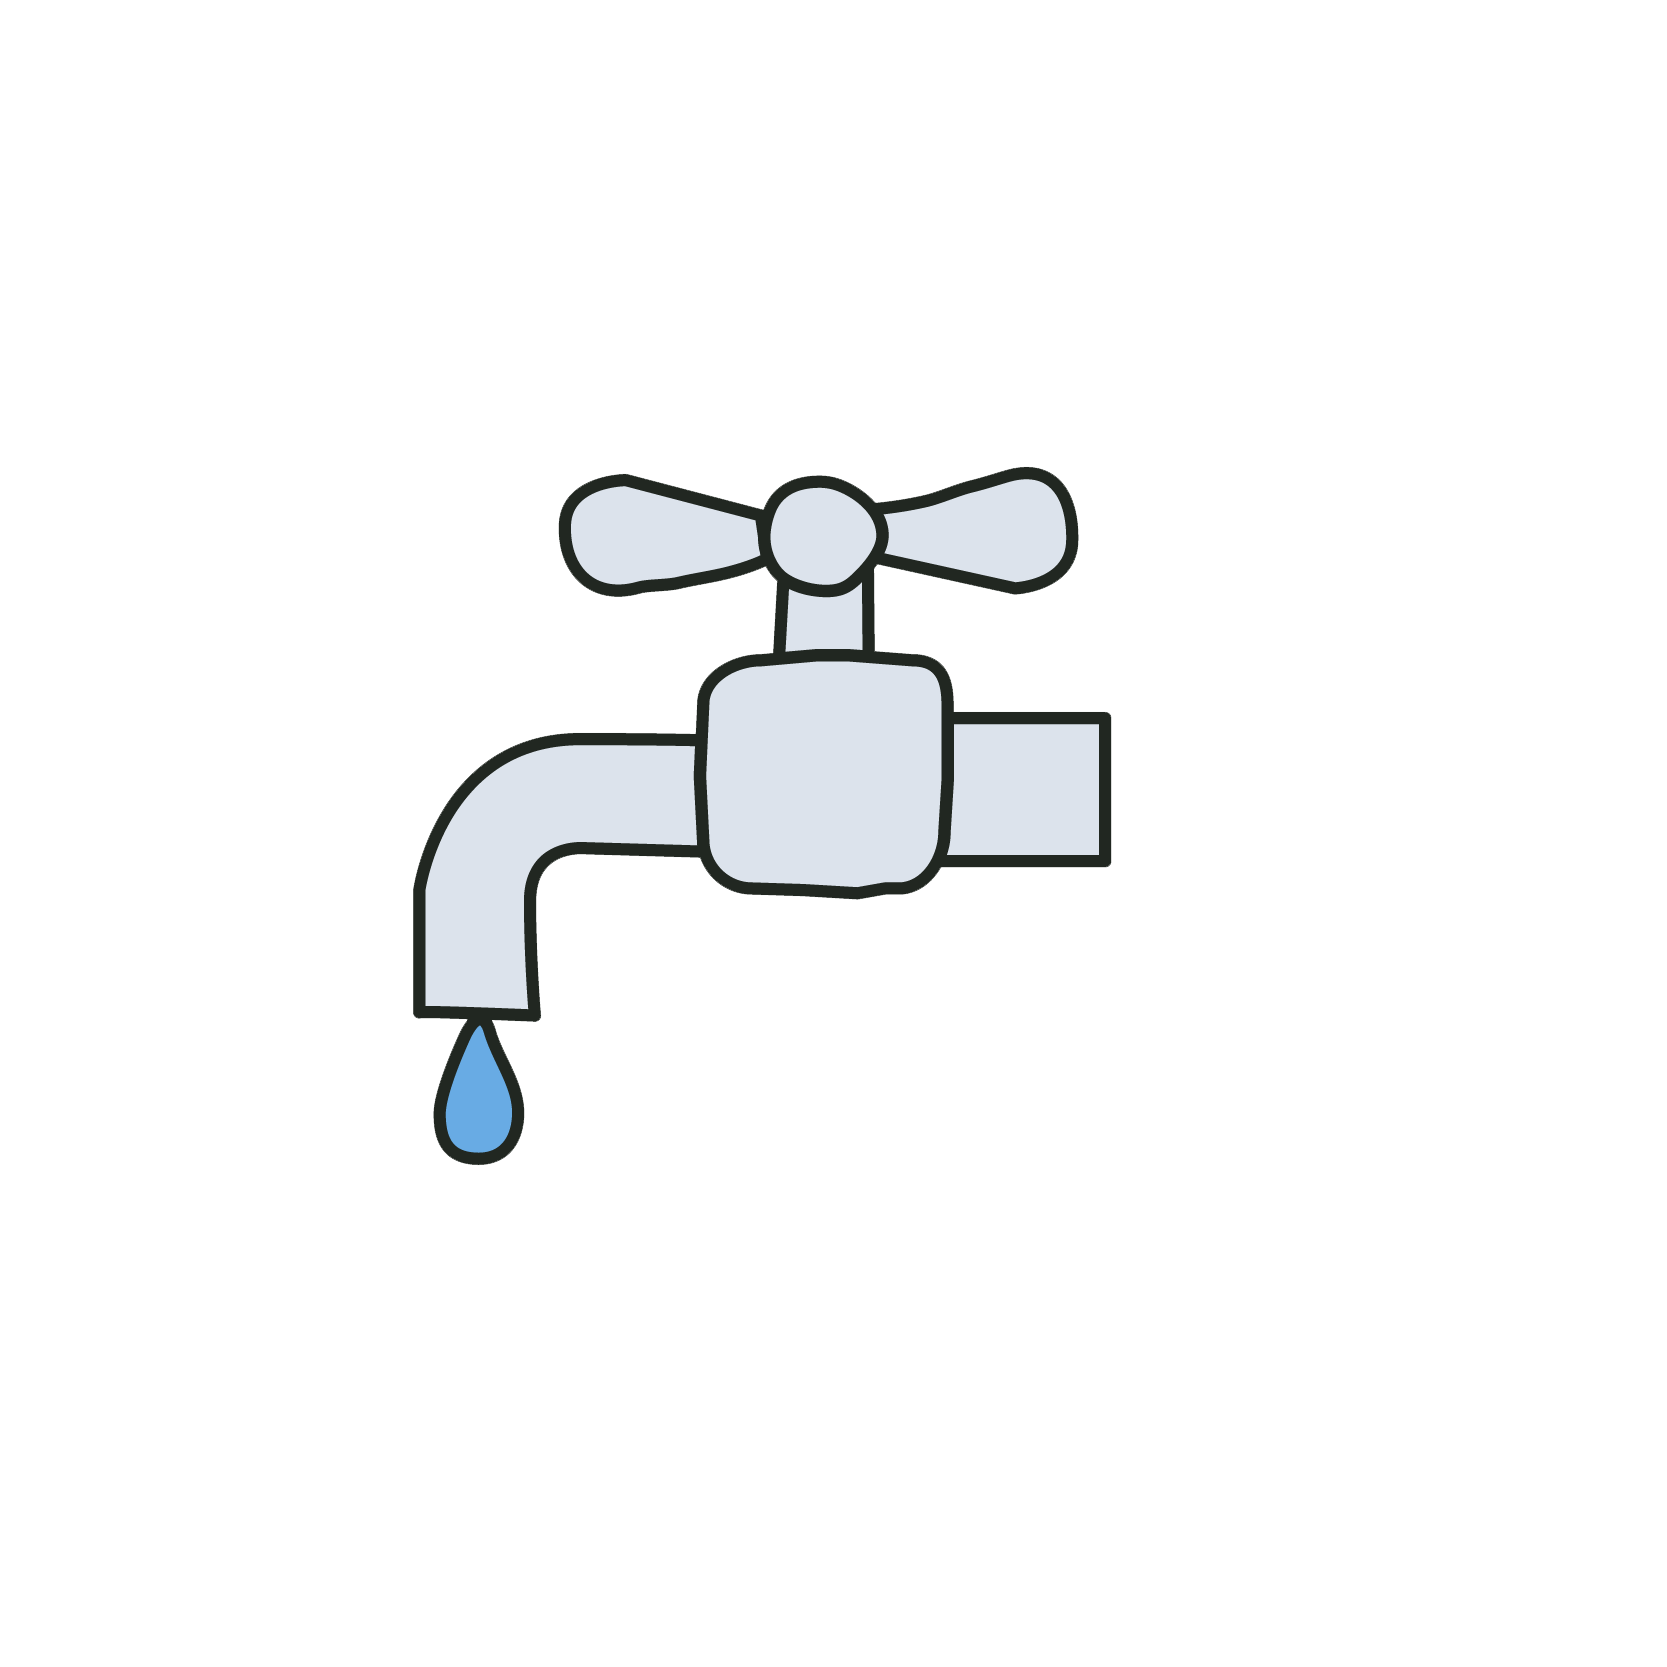 an image of a water tap